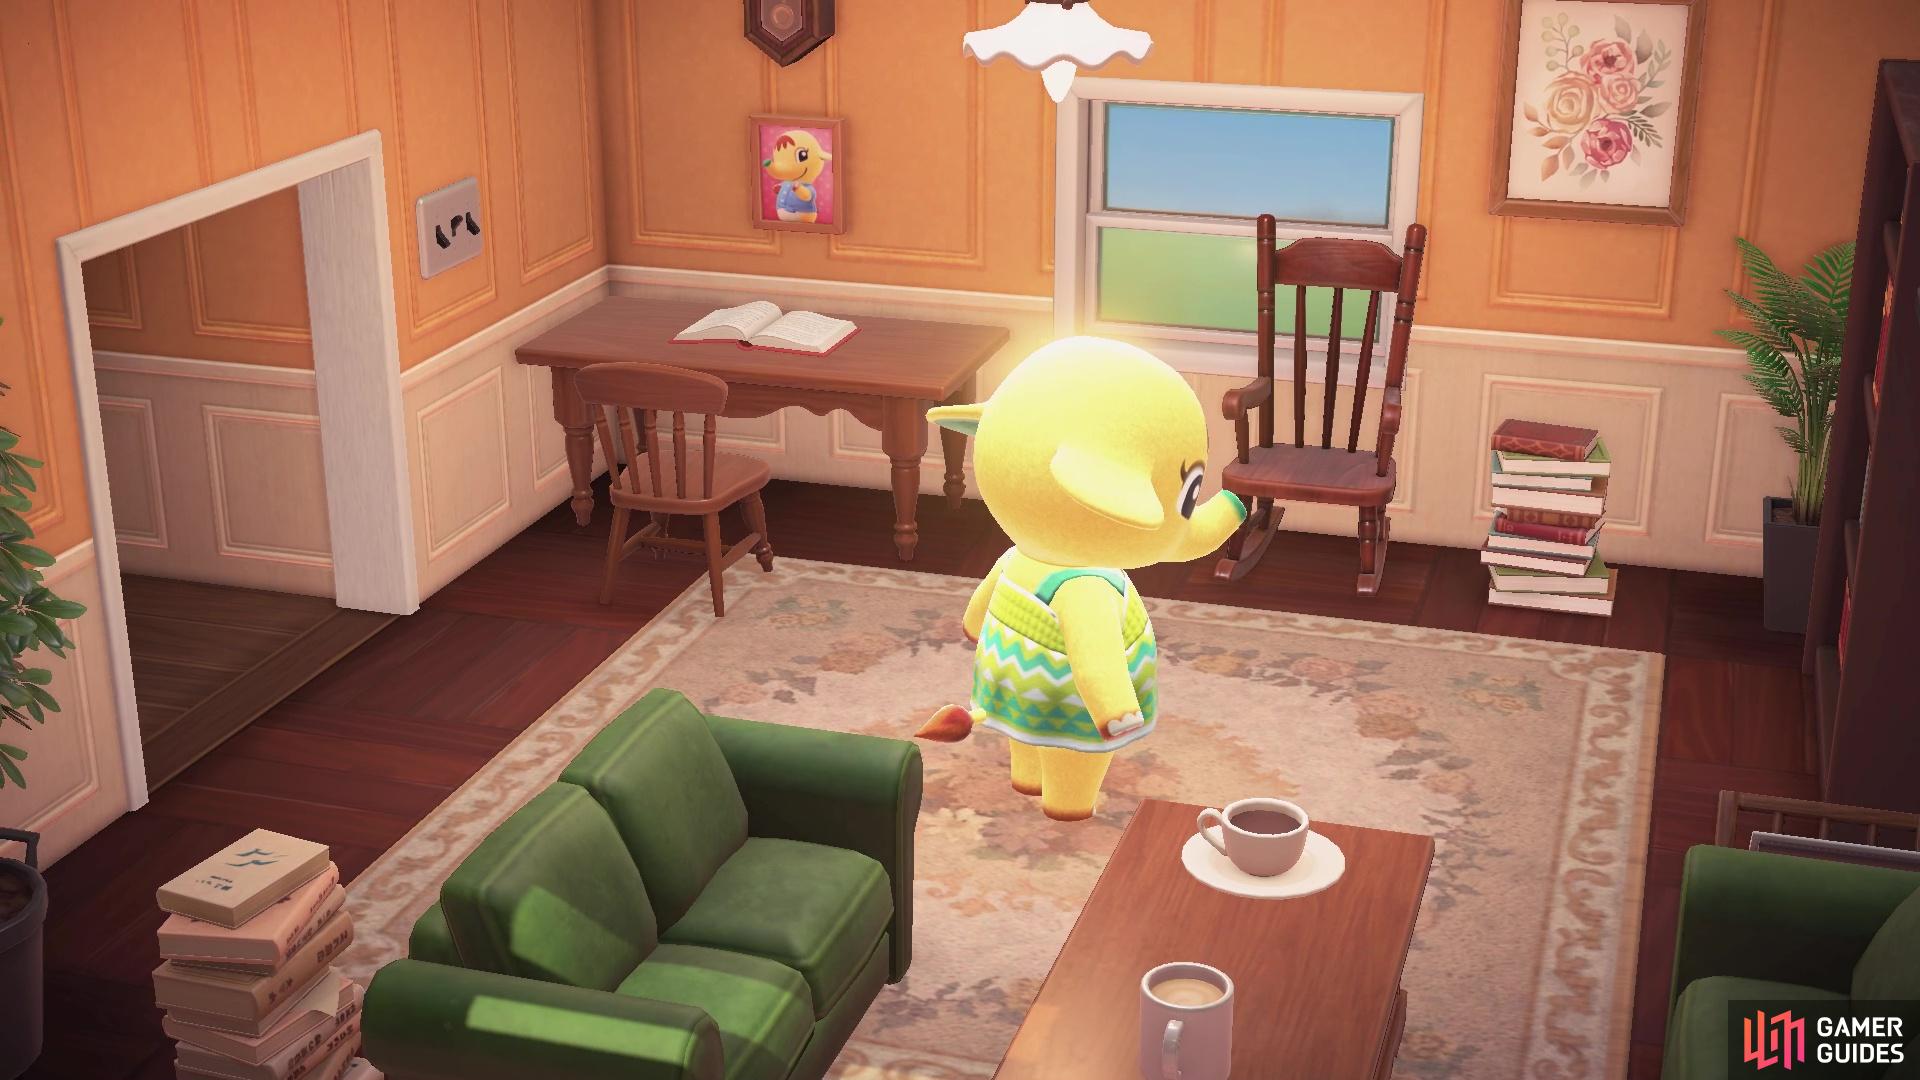 At the end, youll get a brief cut scene of Eloise enjoying her new space.